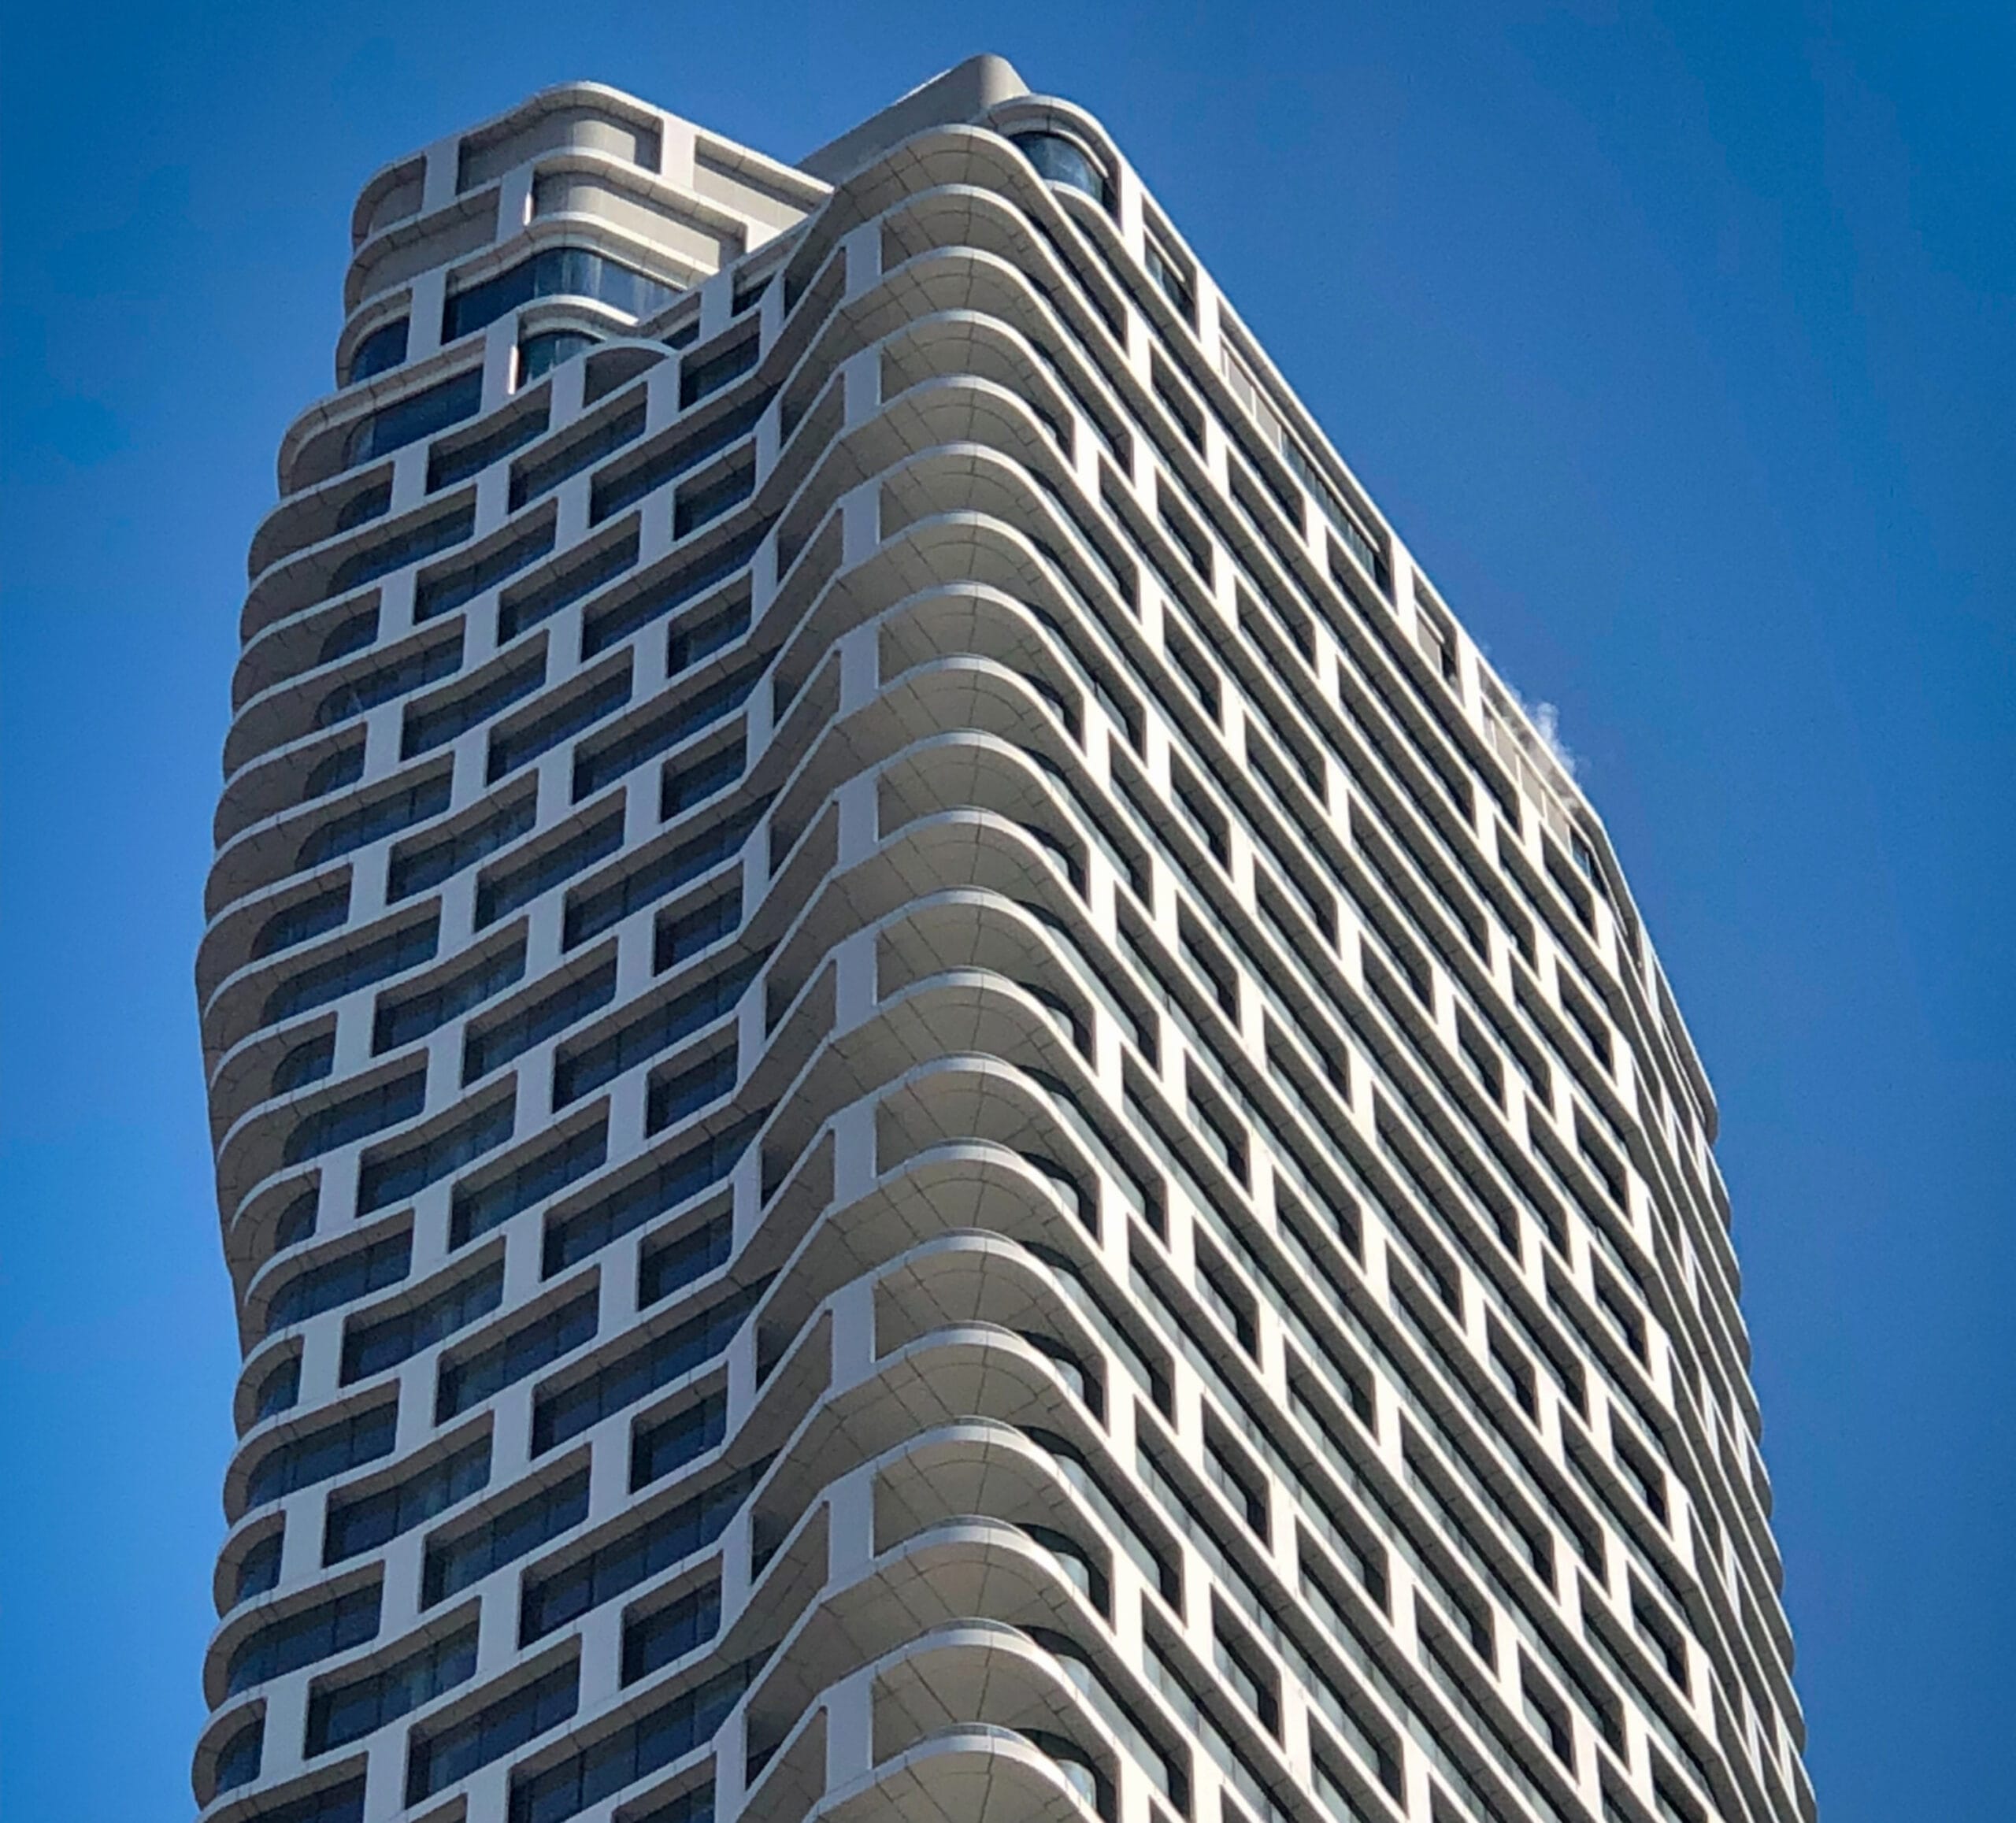 Image of 242-West-53rd Street in New York. Shows undulating surface of the exterior. CentraRuddy Architecture, custom unitized rainscreen system by Riverside Group.